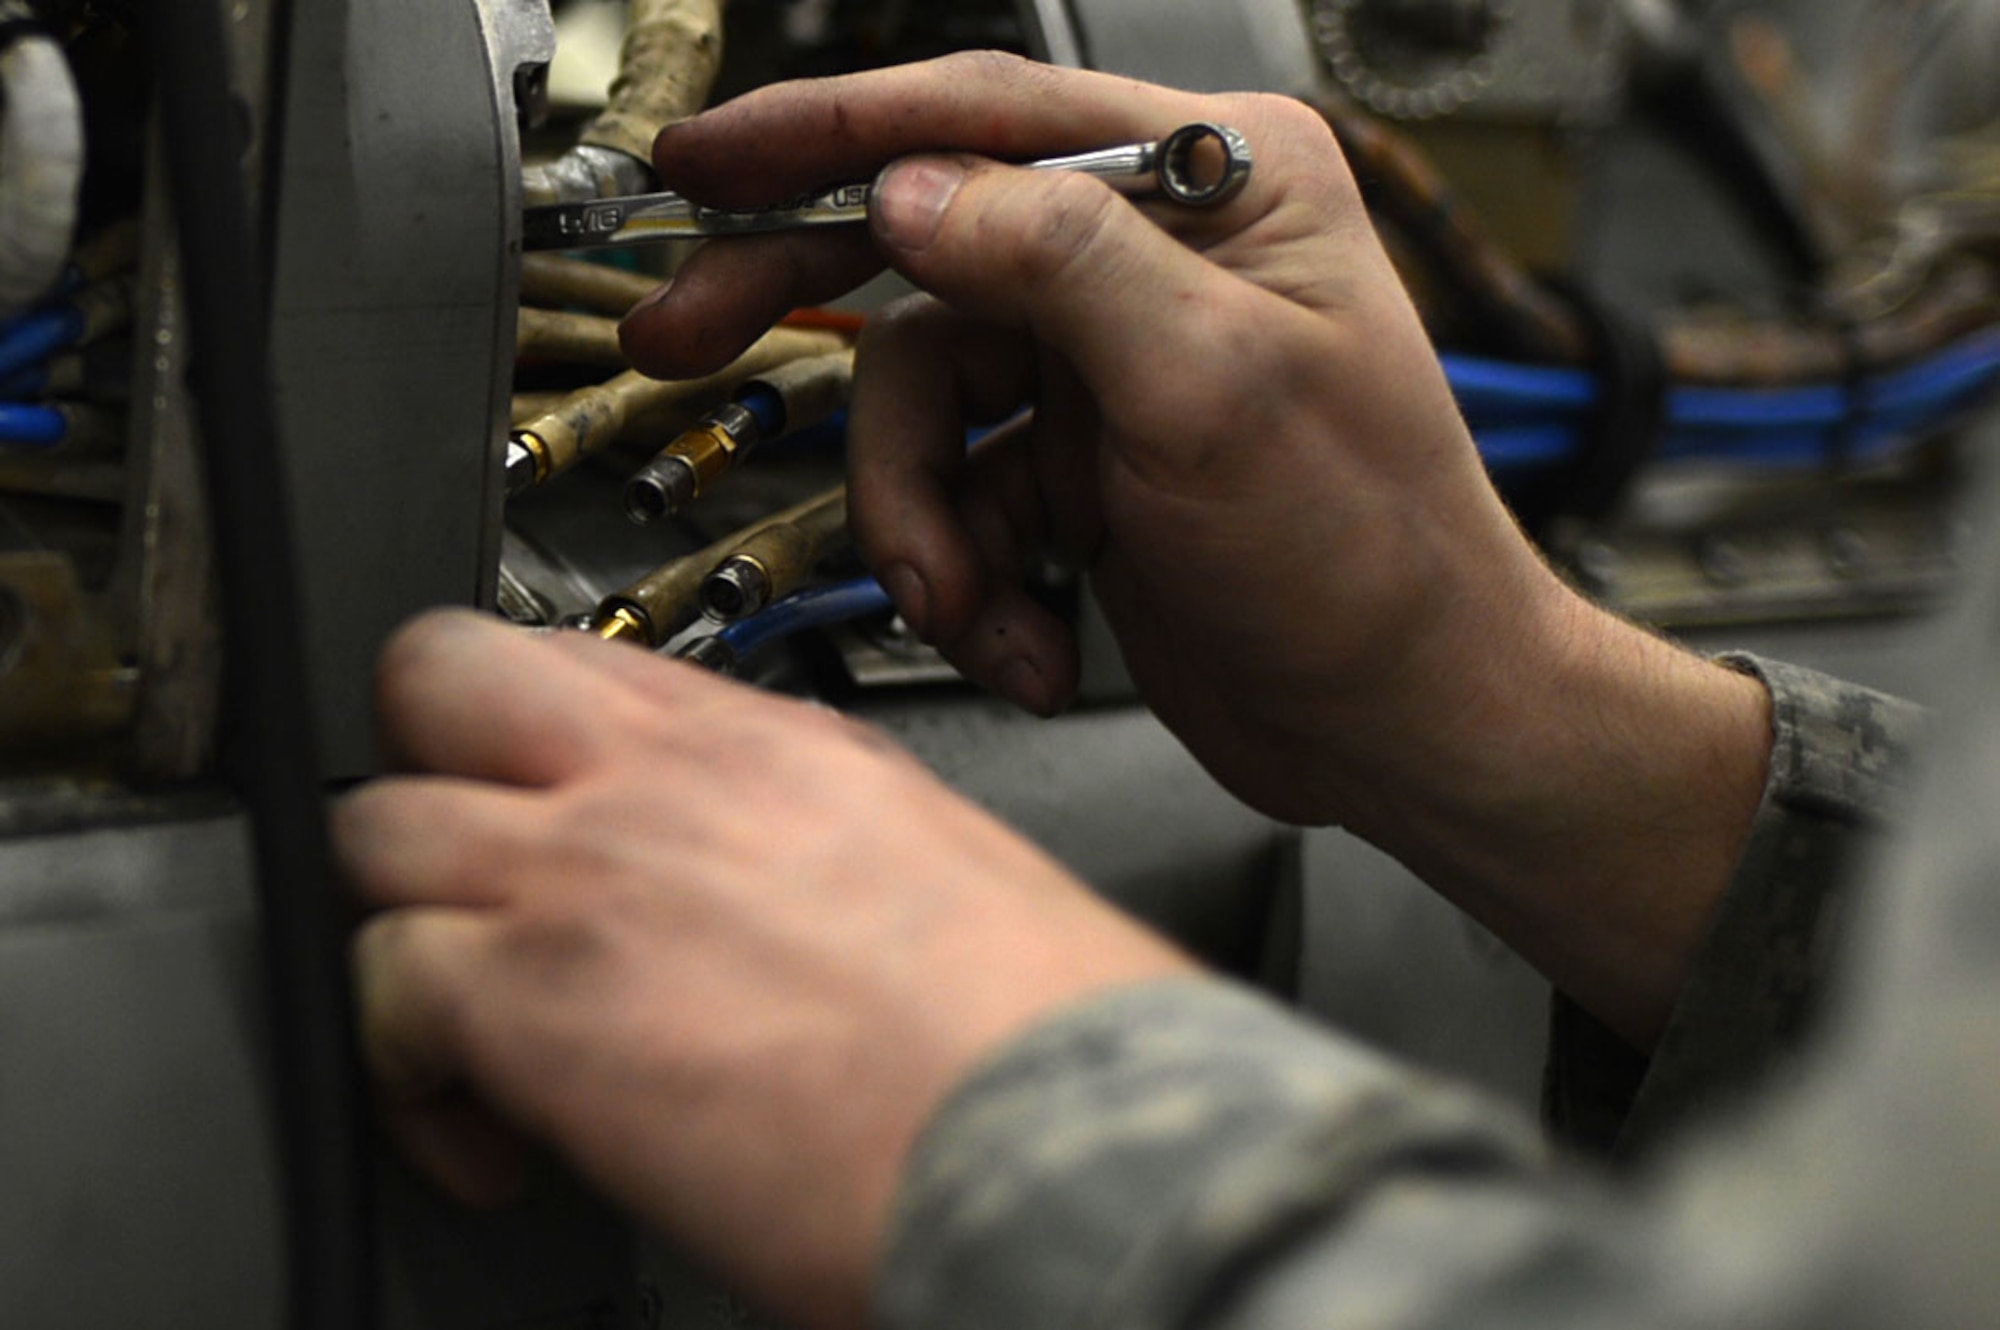 U.S. Air Force Senior Airman Joshua Boyd, 20th Component Maintenance Squadron (CMS) electronic warfare (EW) team member, uses a wrench to perform maintenance on an AN/ALQ-184 electronic countermeasure pod at the EW work center at Shaw Air Force Base, S.C., July 21, 2017. Airmen assigned to the 20th CMS EW work center inspect the pods every 120 days to ensure they are functioning properly to deter incoming surface-to-air missiles. (U.S. Air Force photo by Senior Airman Christopher Maldonado)